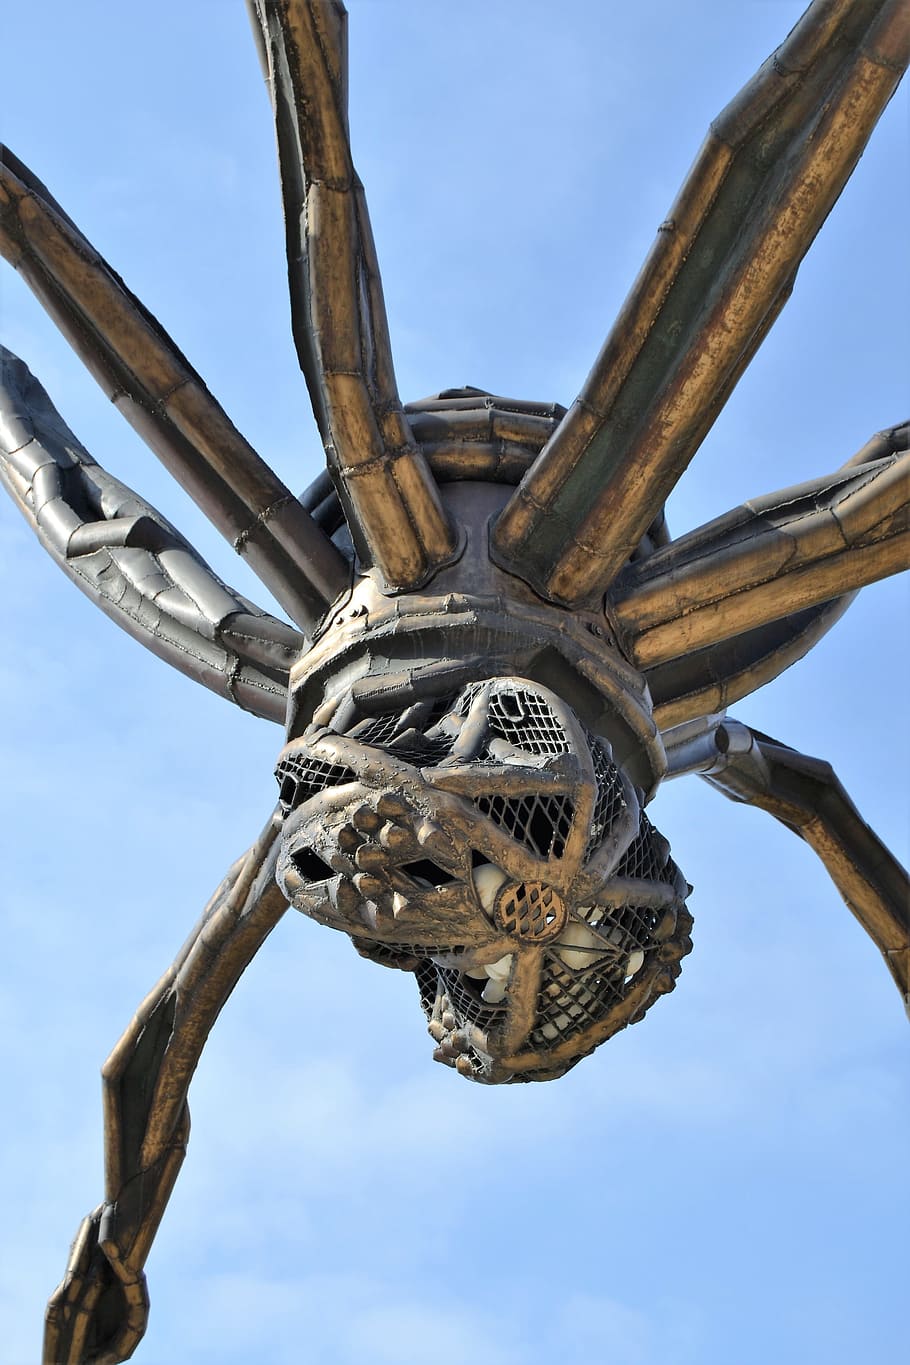 spider, guggenheim, bilbao, giant spider, sky, low angle view, day, nature, outdoors, architecture